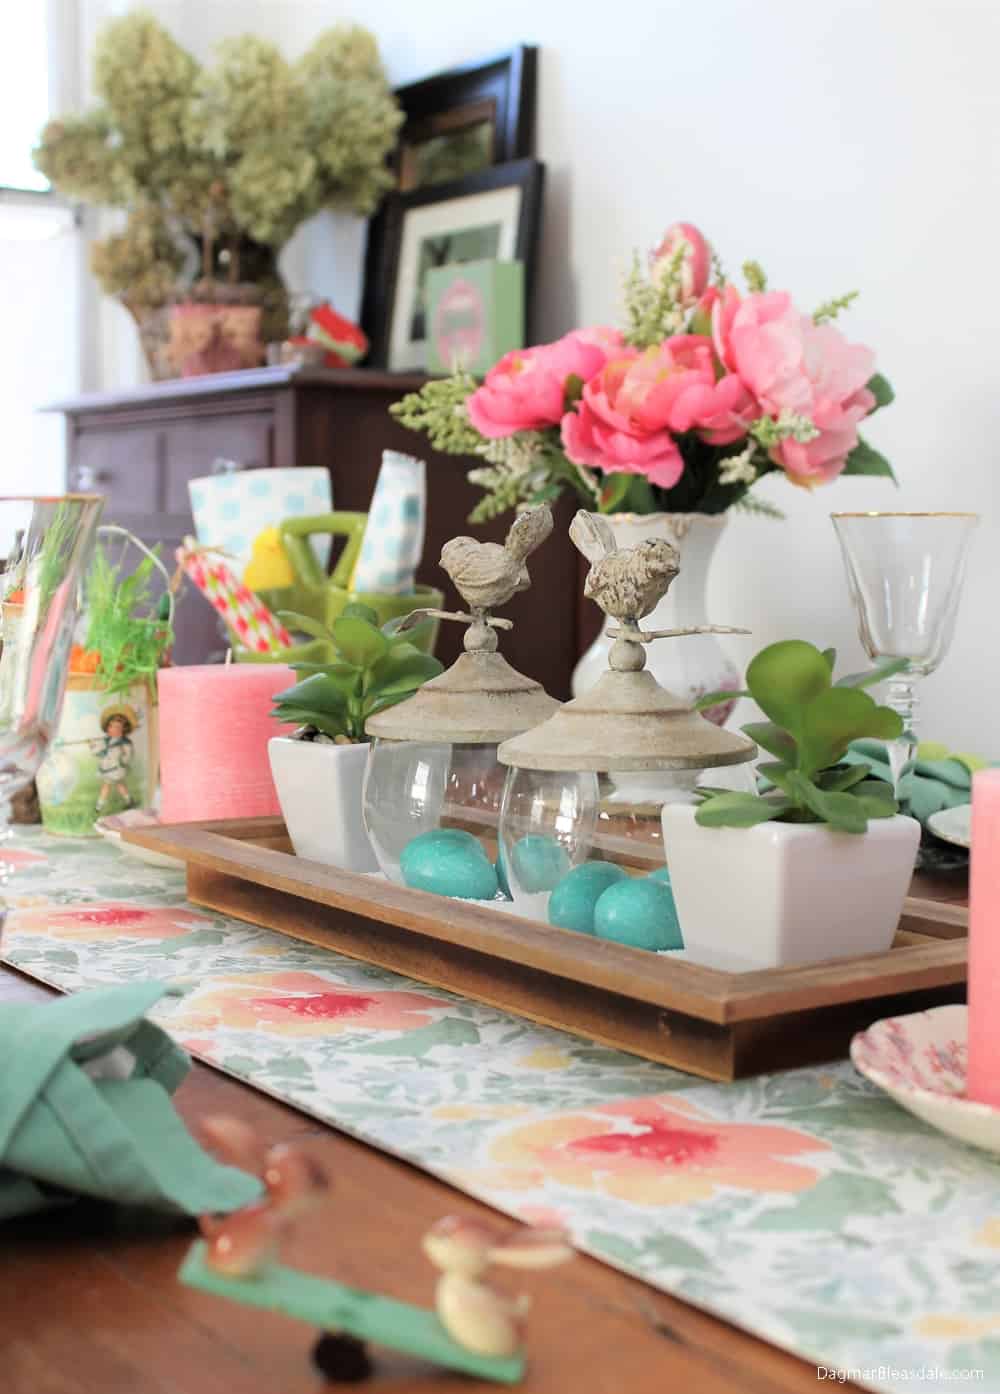 Easter decor on table, tray with flowers, bird decor, and candles